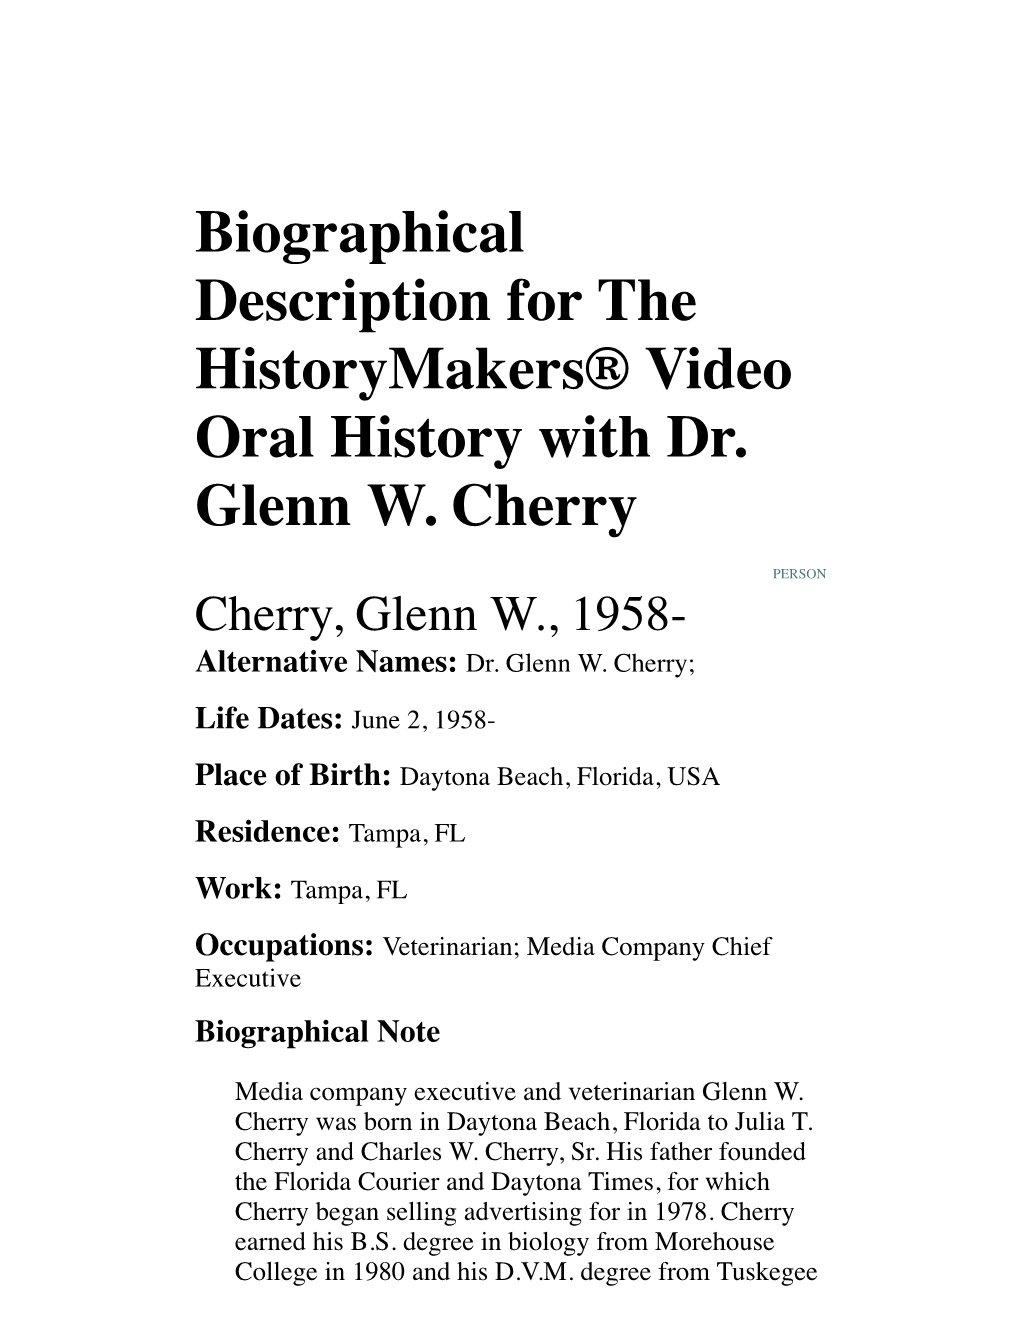 Biographical Description for the Historymakers® Video Oral History with Dr